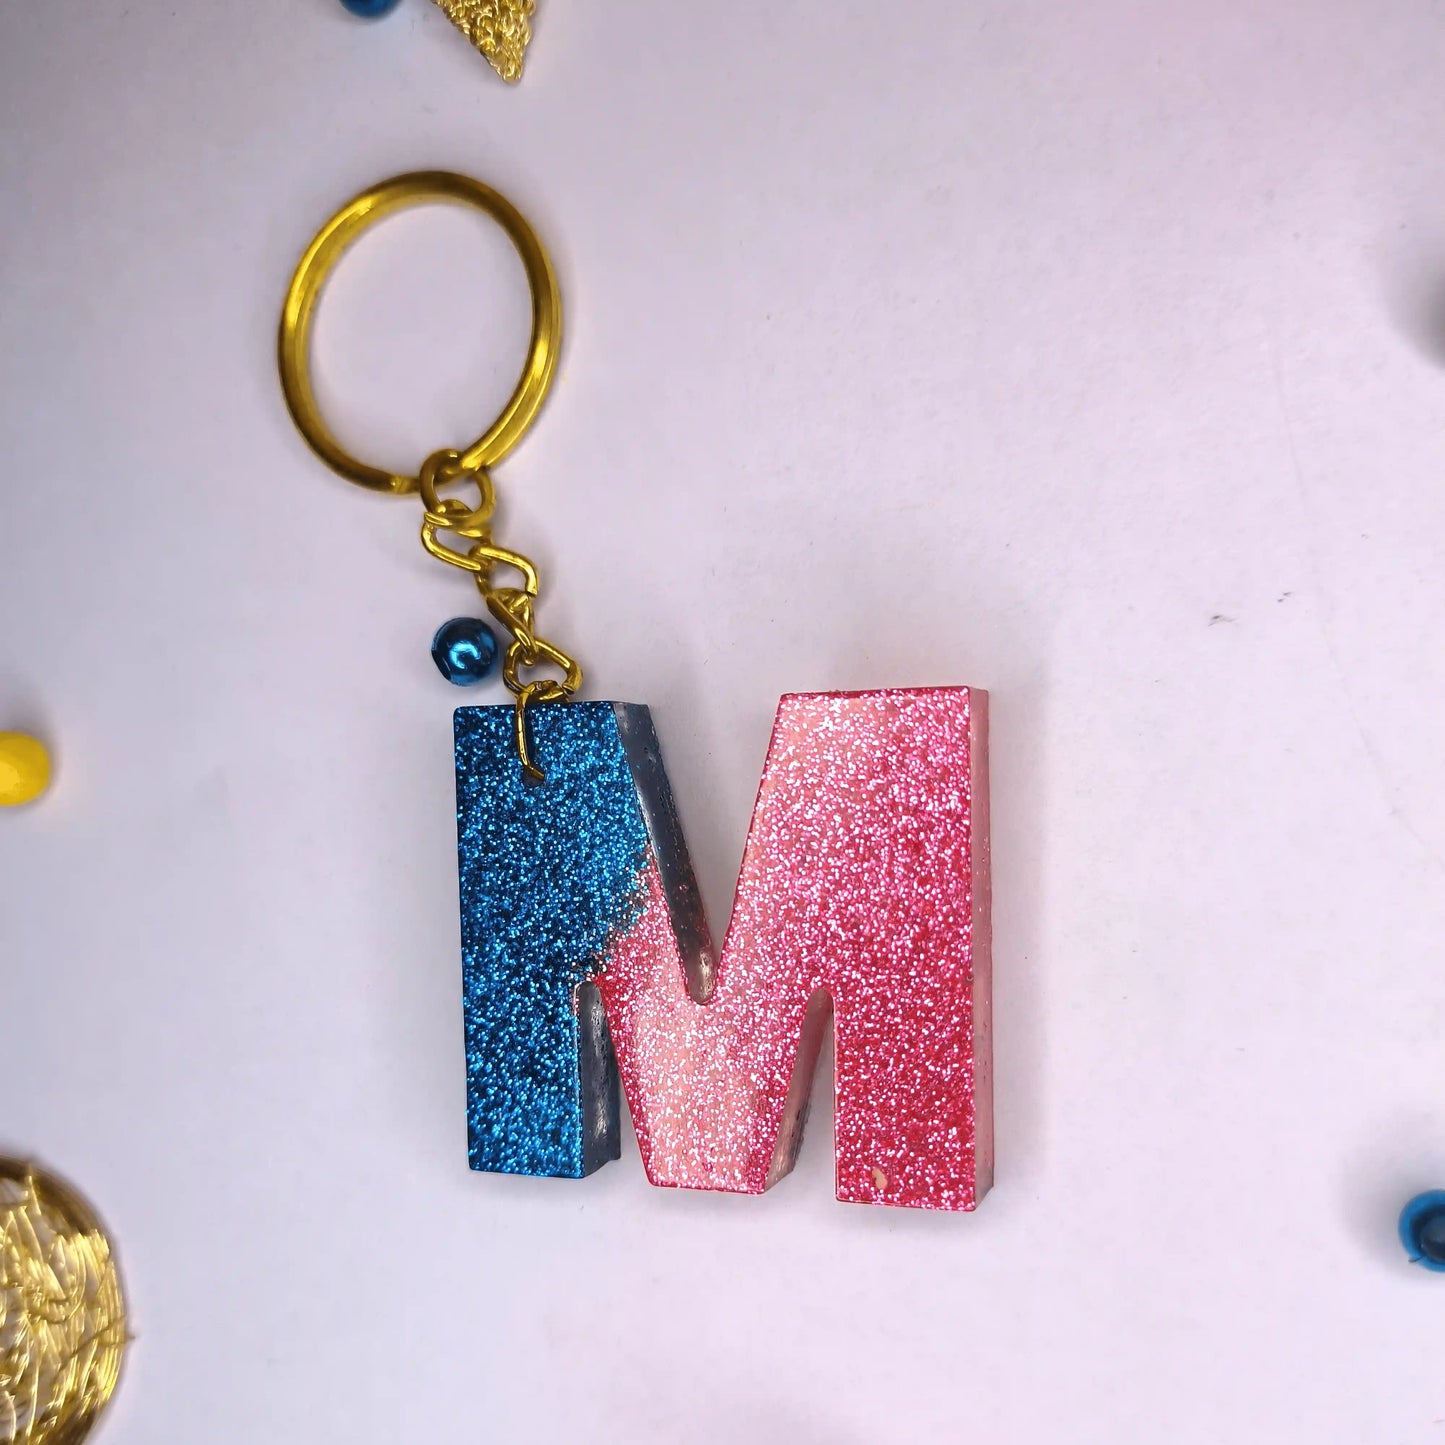 Get Multi-color shine resin keychains with m Letter For Best Friend